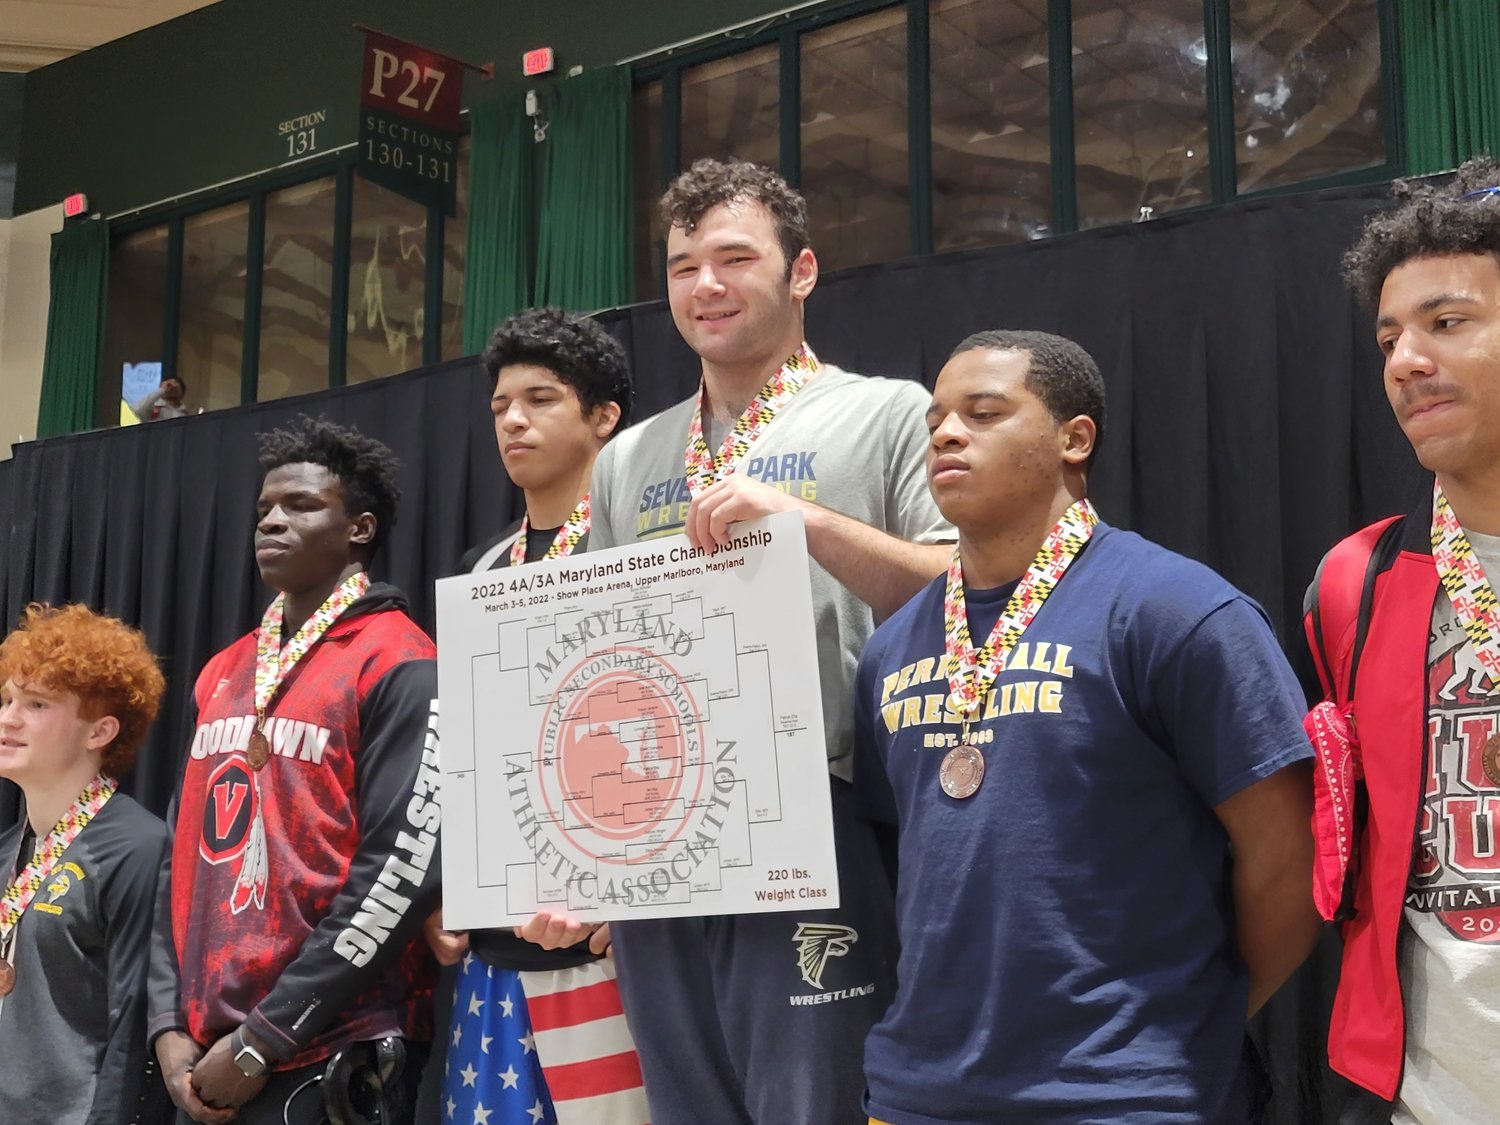 Patrick Ellis (center) Ellis won the Class 3A/4A state wrestling title for the 220-pound class, beating a previously undefeated wrestler, South River’s Lonnell Owens-Pabon.